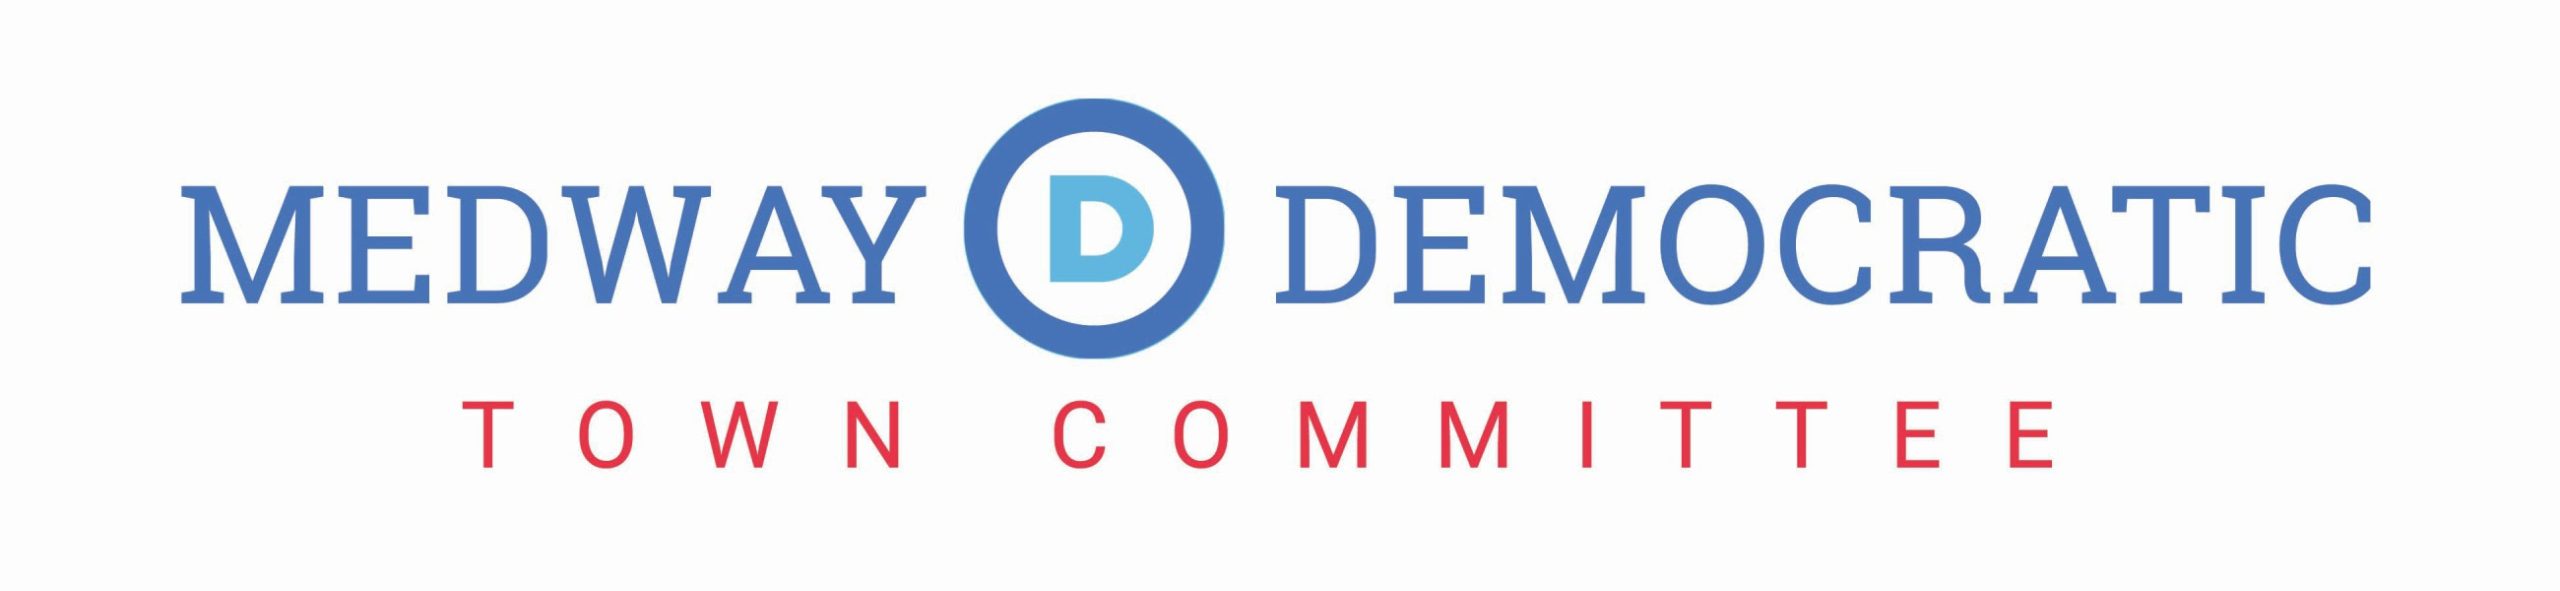 Medway Democratic Town Committee